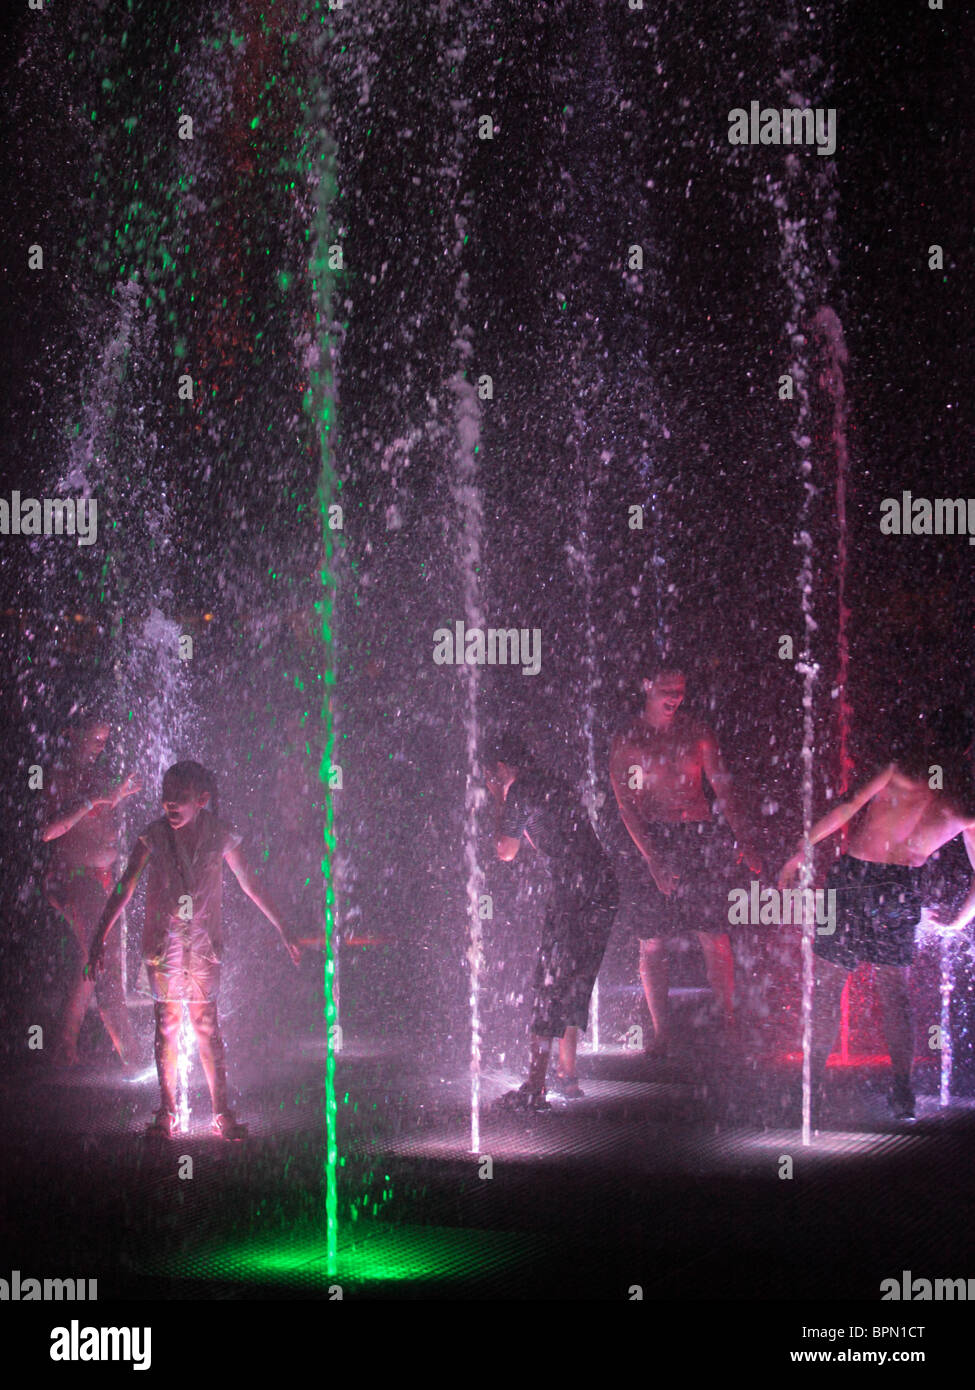 Kids playing in water jets, at night Stock Photo